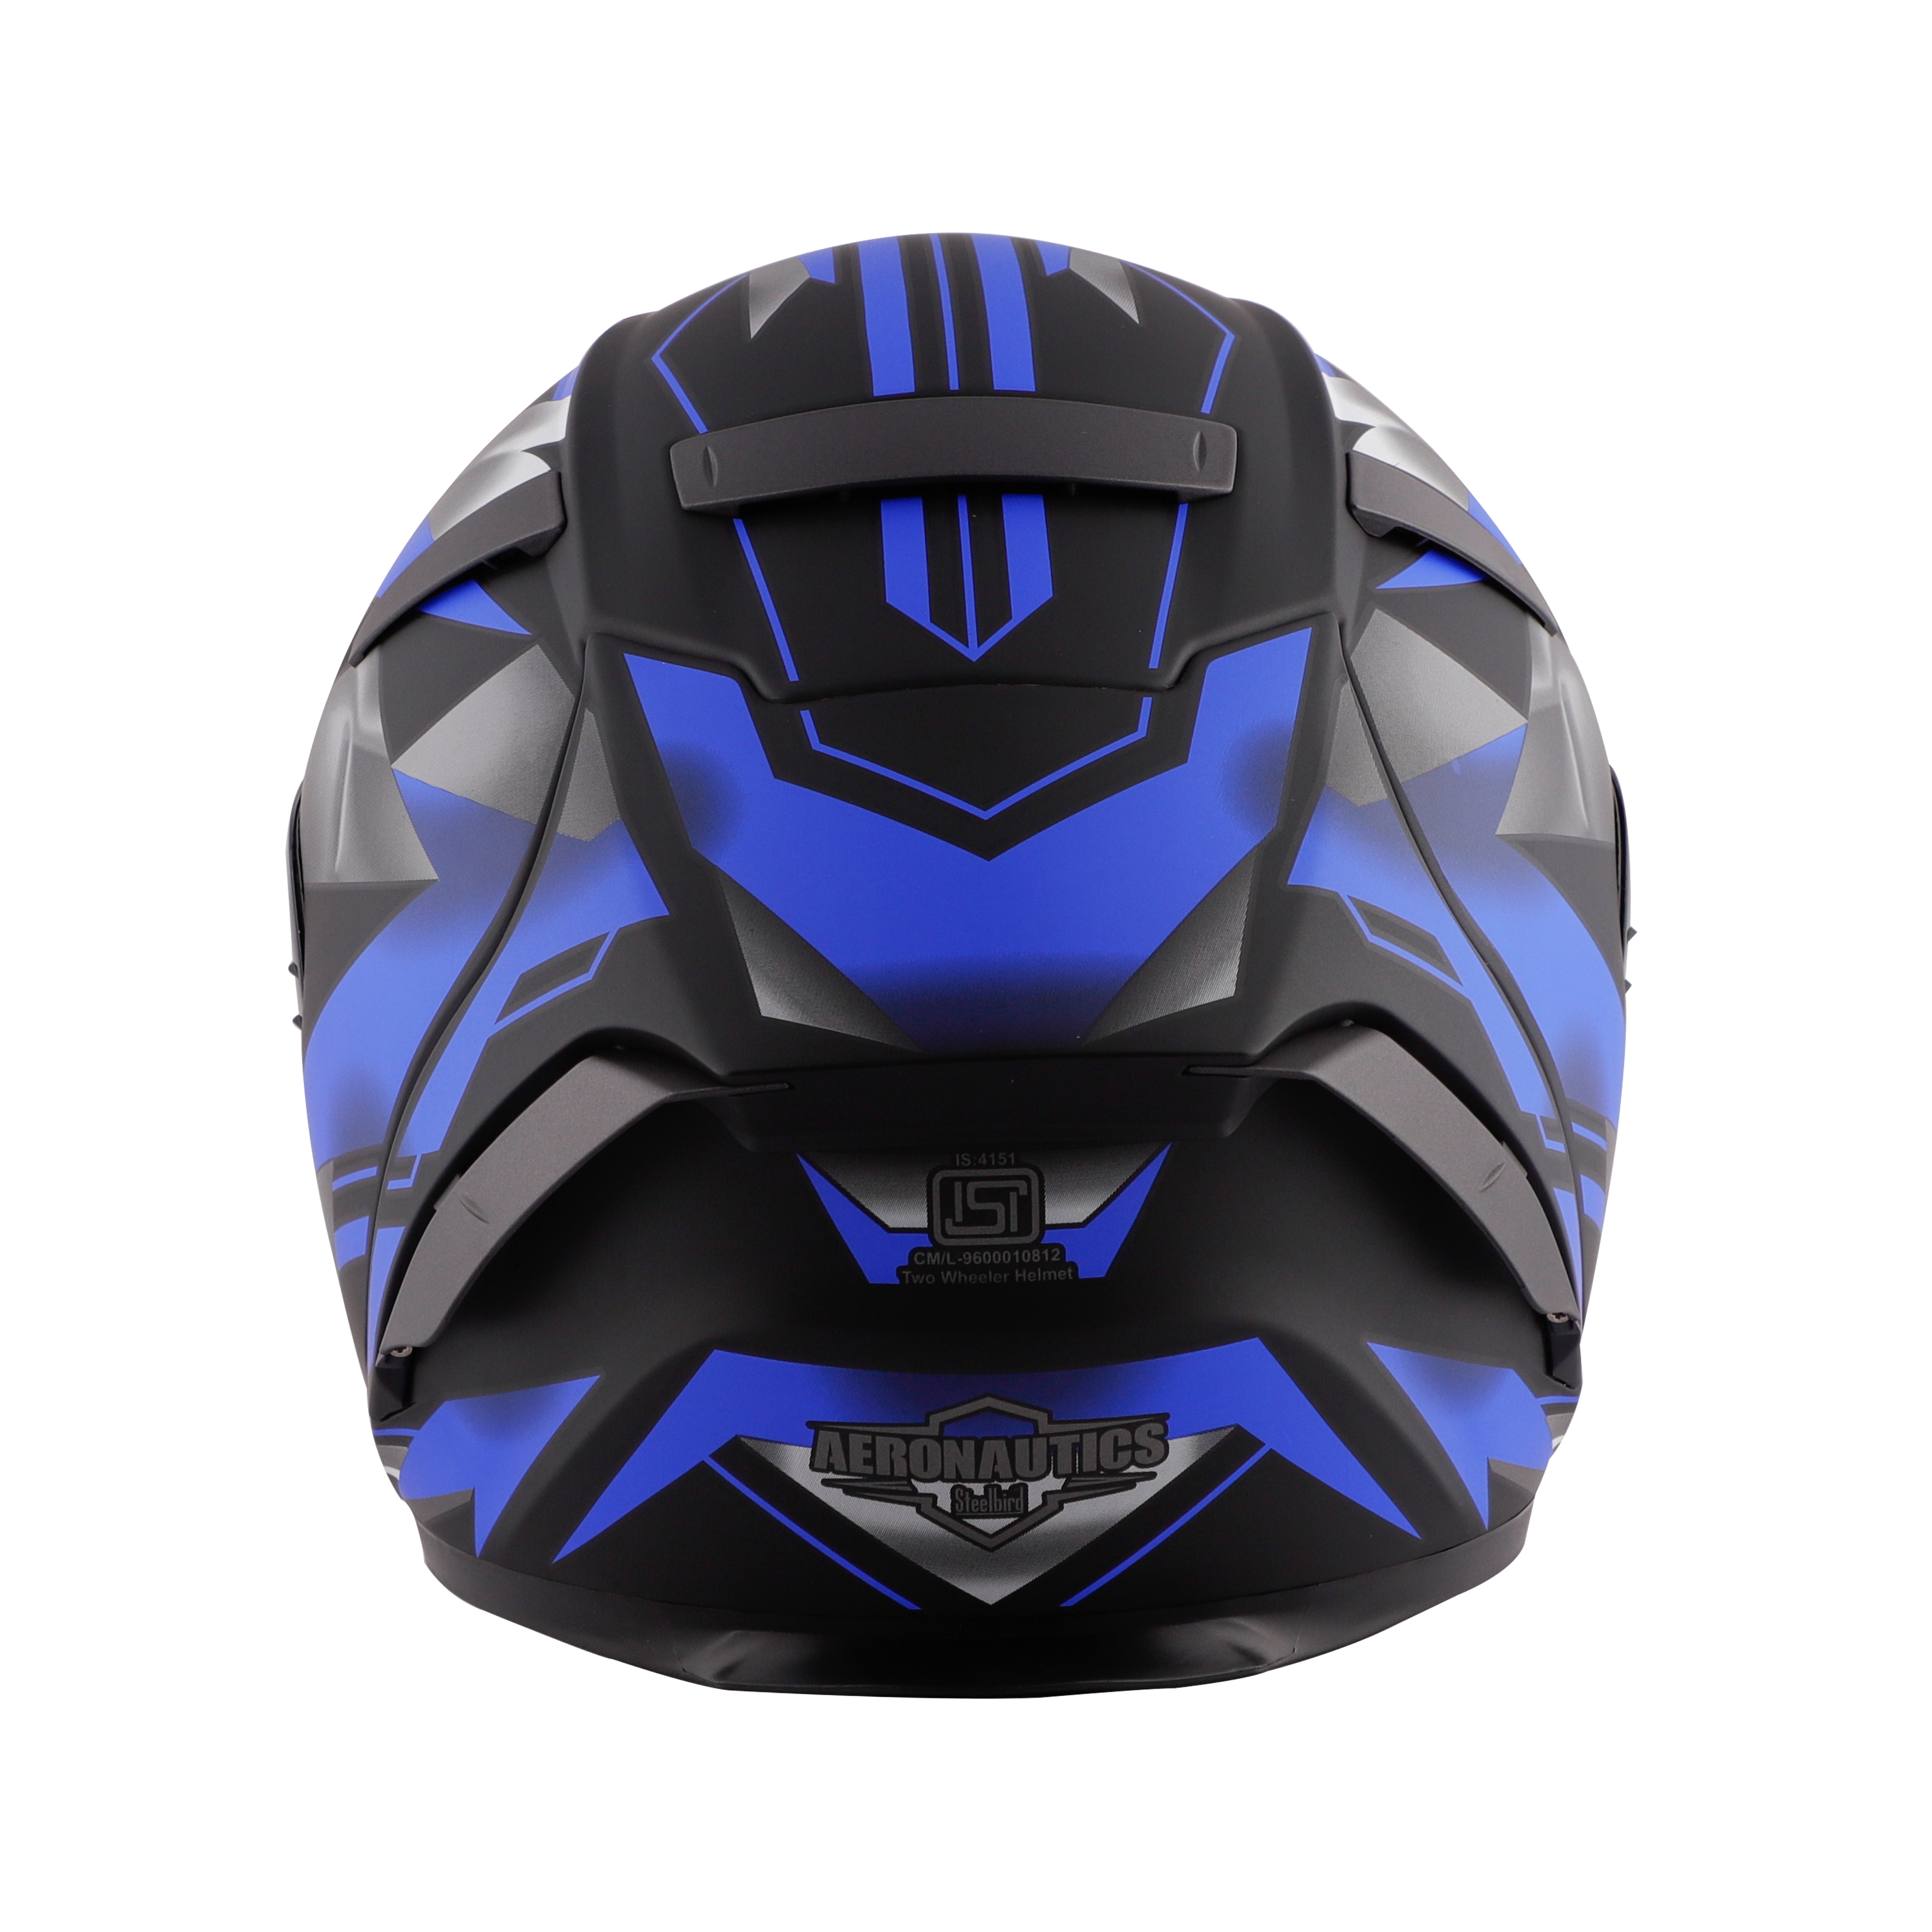 SA-2 METALLIC GLOSSY BLACK WITH BLUE ( FITTED WITH CLEAR VISOR  EXTRA CHROME SILVER VISOR FREE) WITH ANTI-FOG SHIELD HOLDER